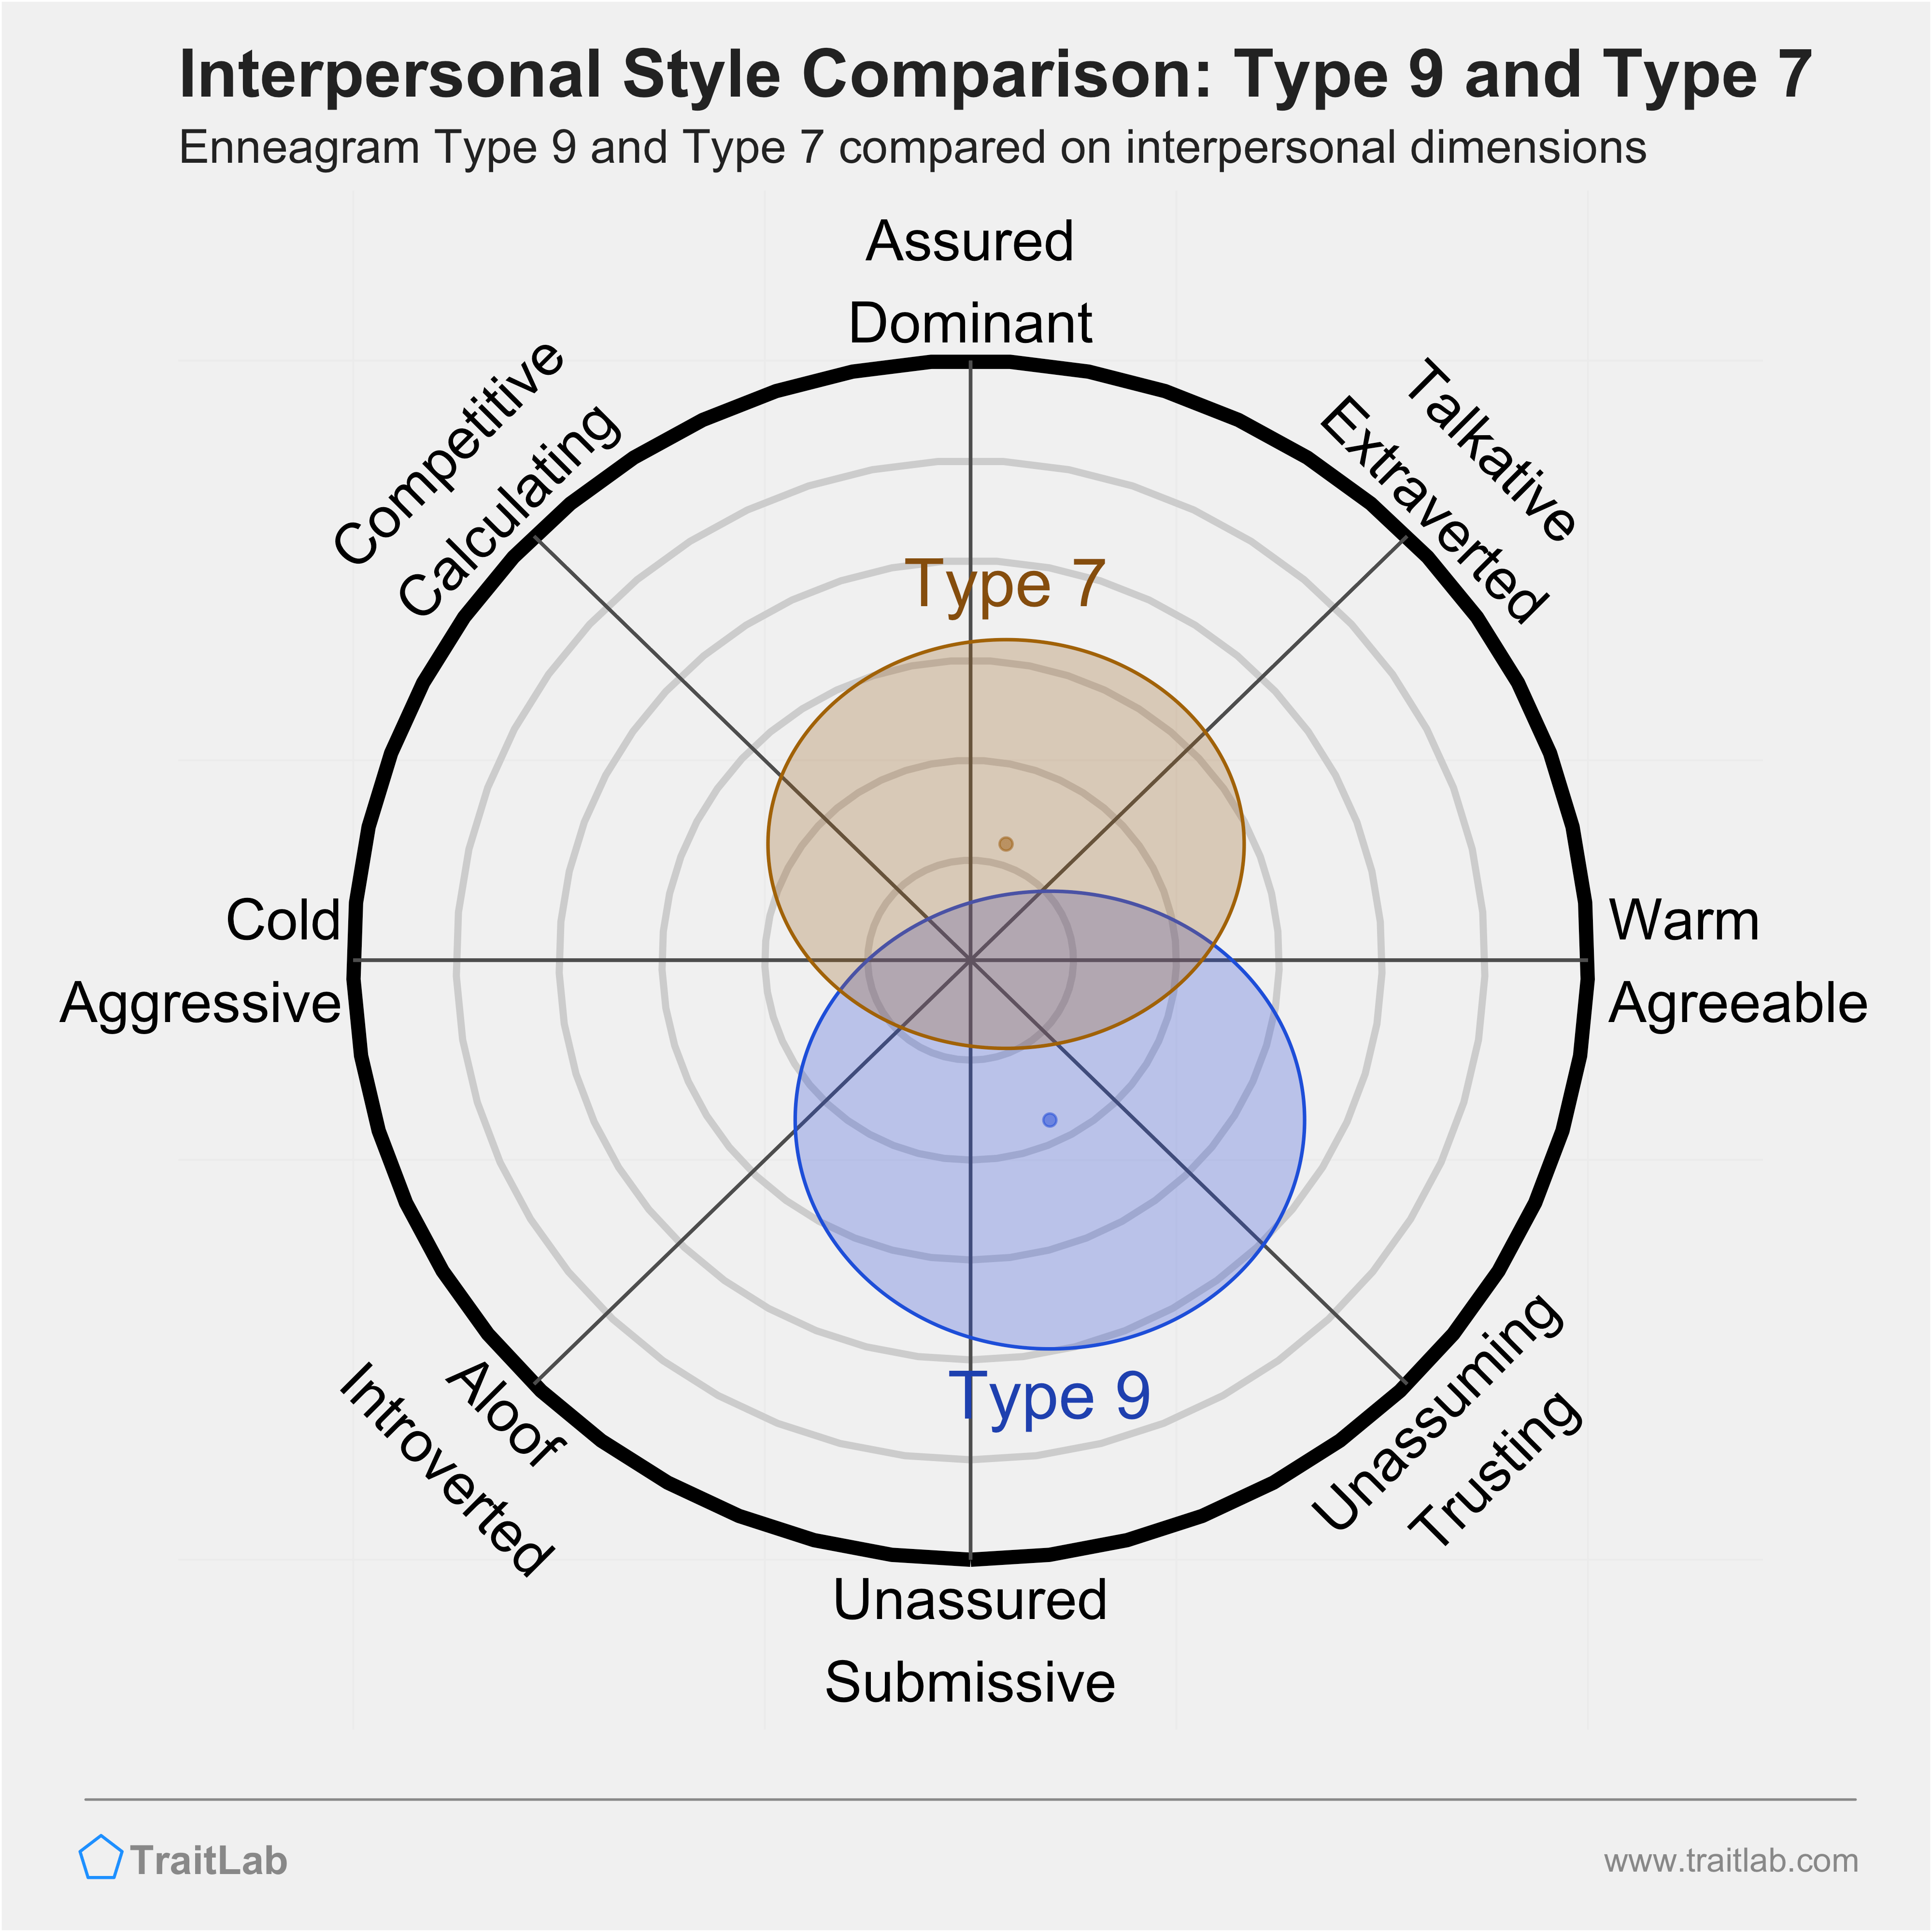 Enneagram Type 9 and Type 7 comparison across interpersonal dimensions